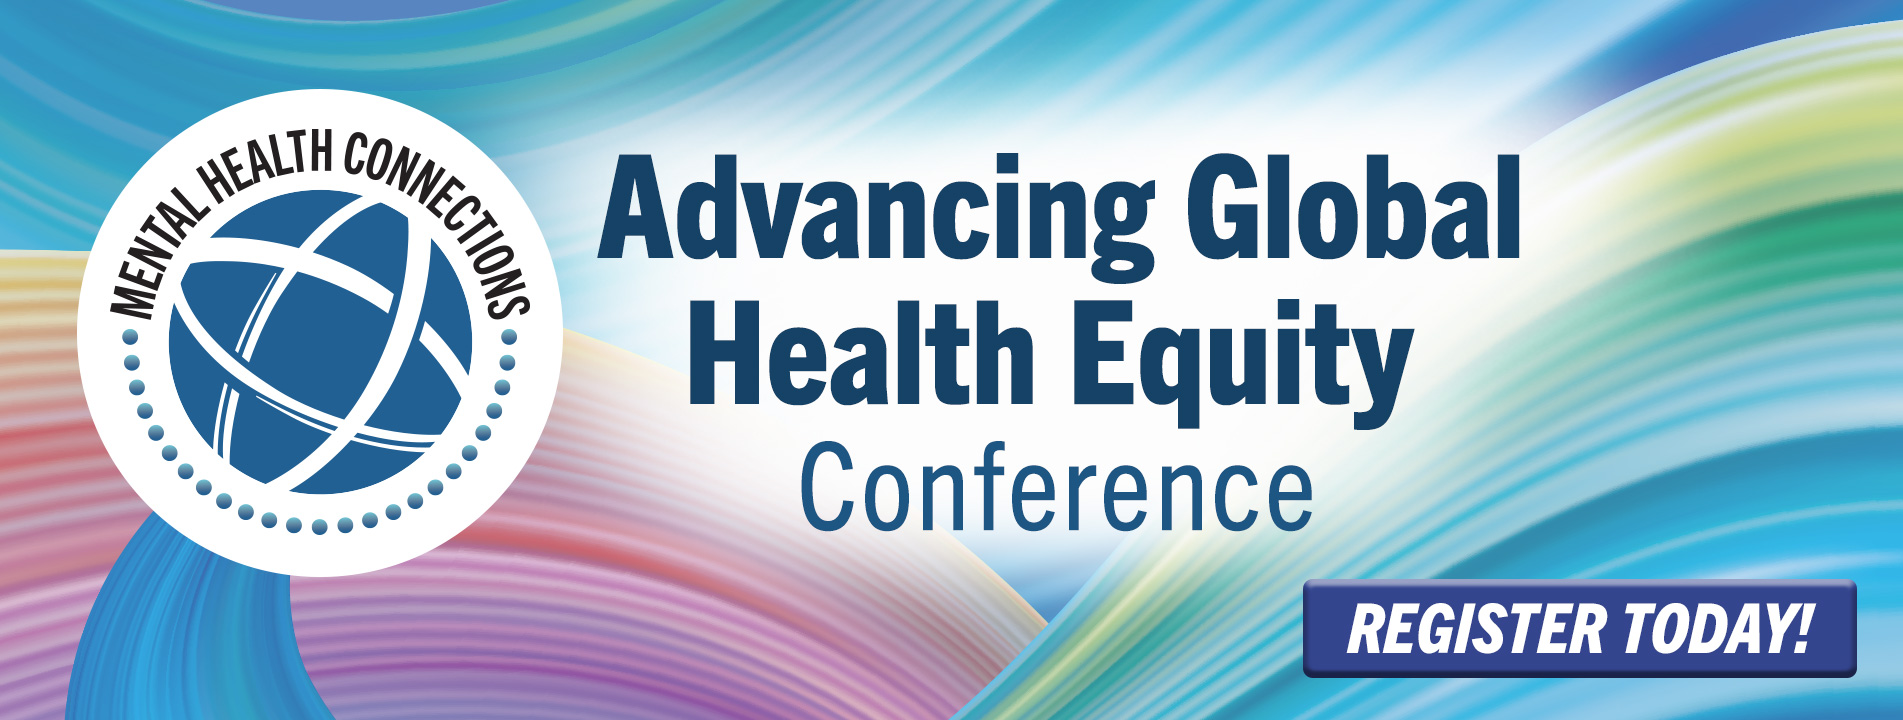 Advancing Global Health Equity Conference